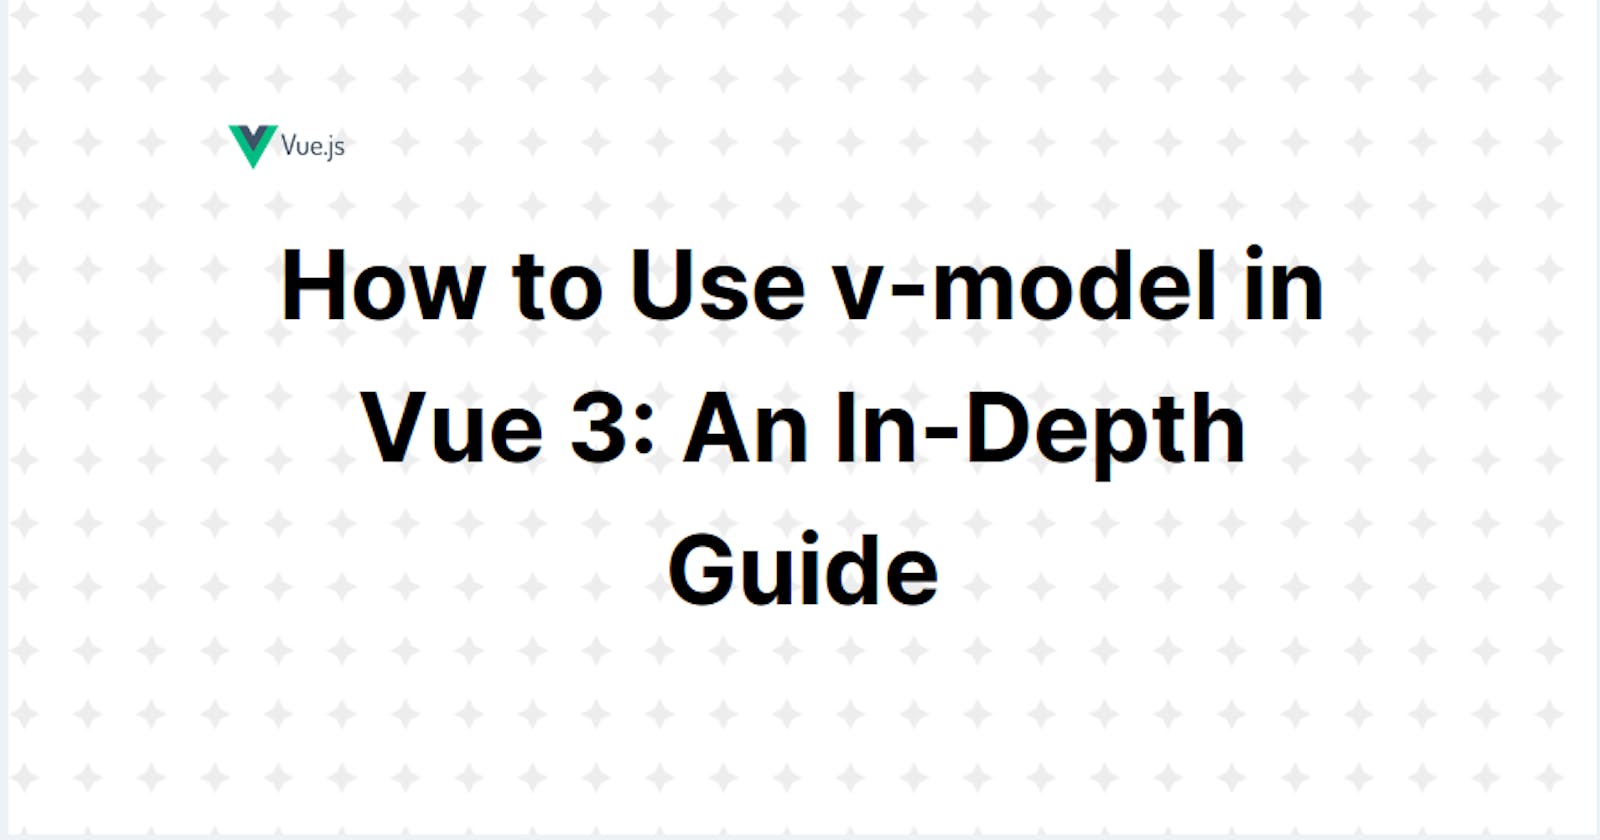 How to Use v-model in Vue 3: An In-Depth Guide